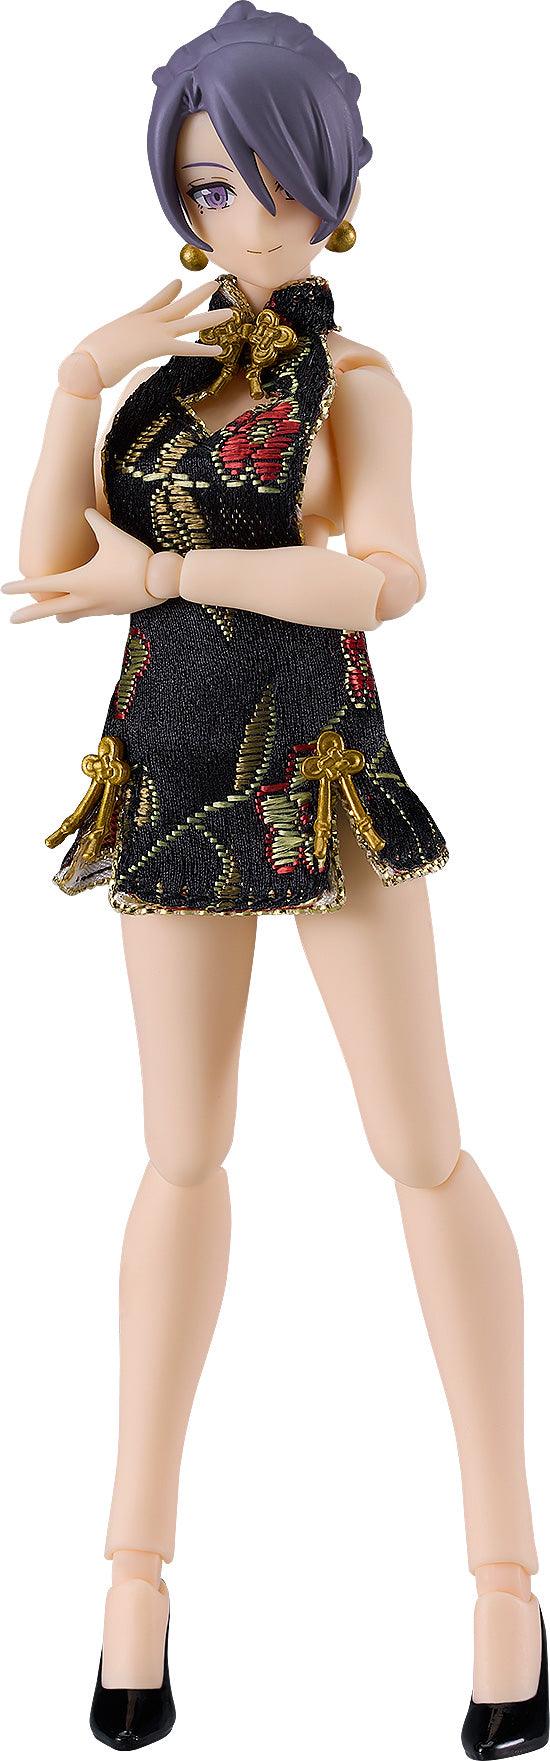 Max Factory figma figma Styles: Female Body (Mika) with Mini Skirt Chinese Dress Outfit (Black) - SaQra Mart Hobby